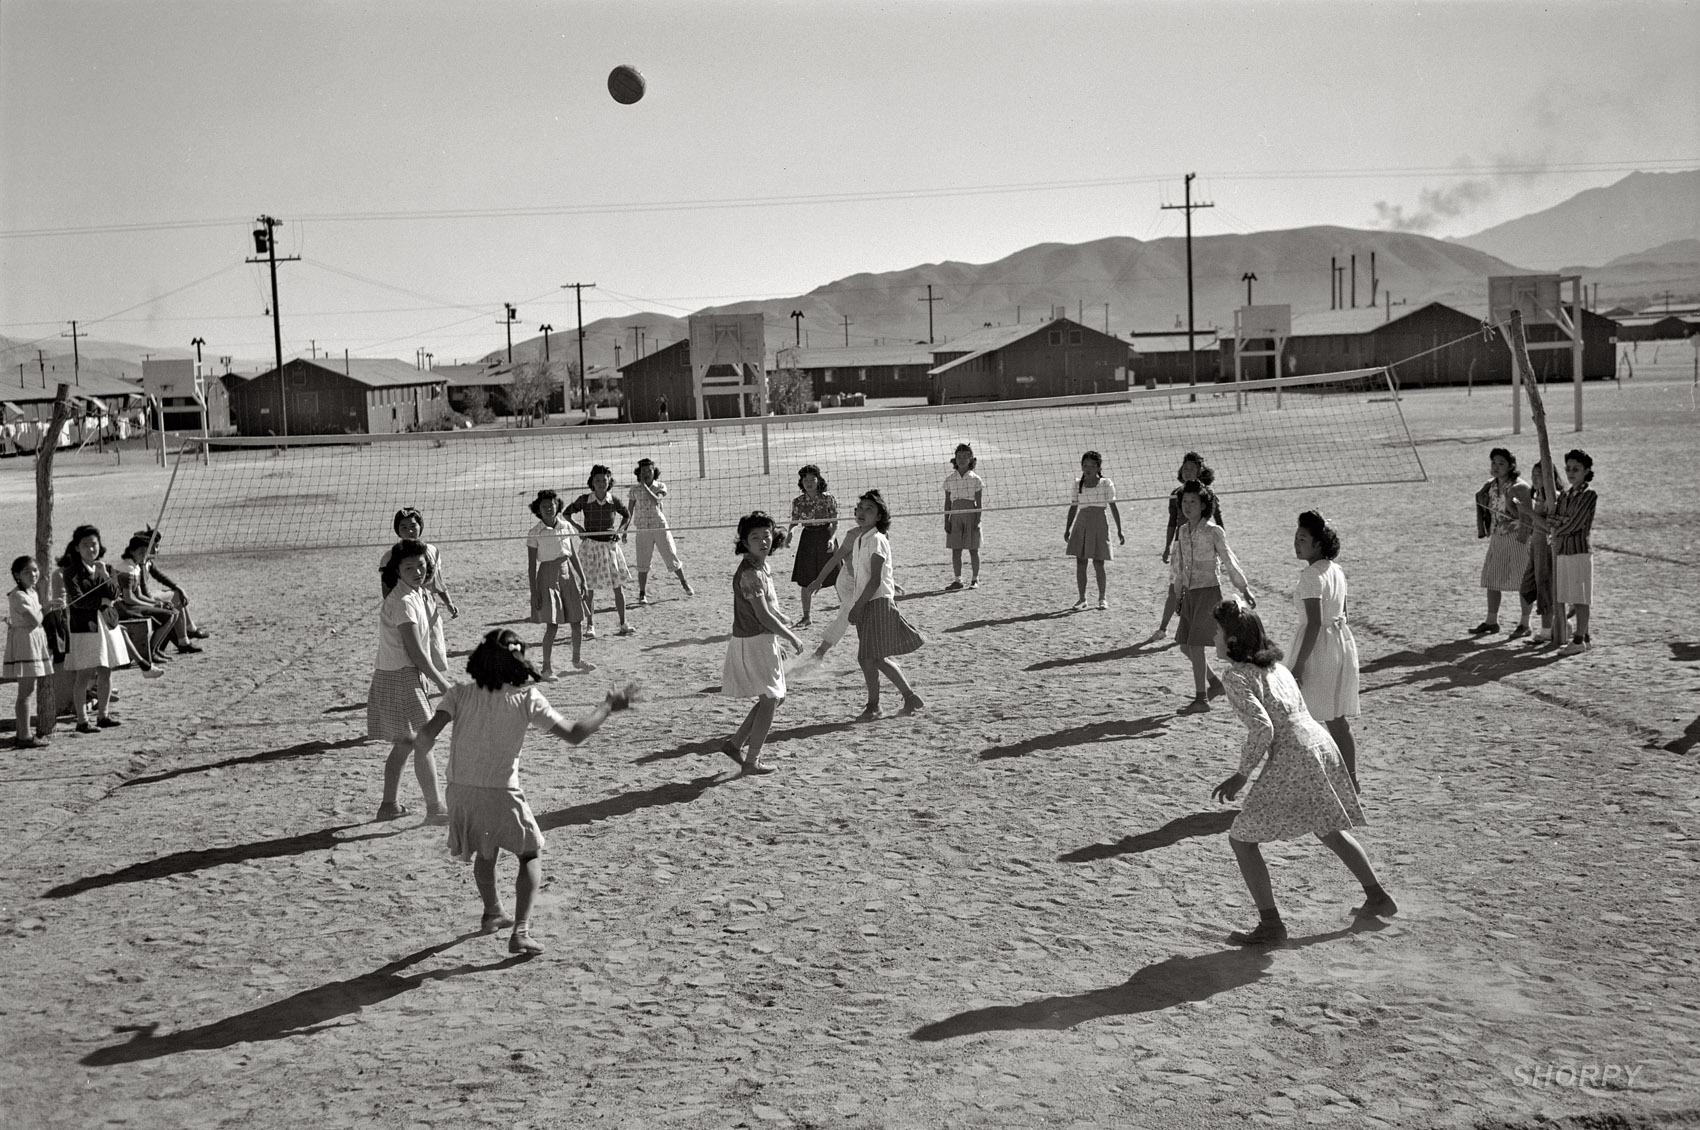 1943. "Manzanar Relocation Center, California. Japanese-American women playing volleyball." 4.5 x 3 inch nitrate negative by Ansel Adams. View full size.